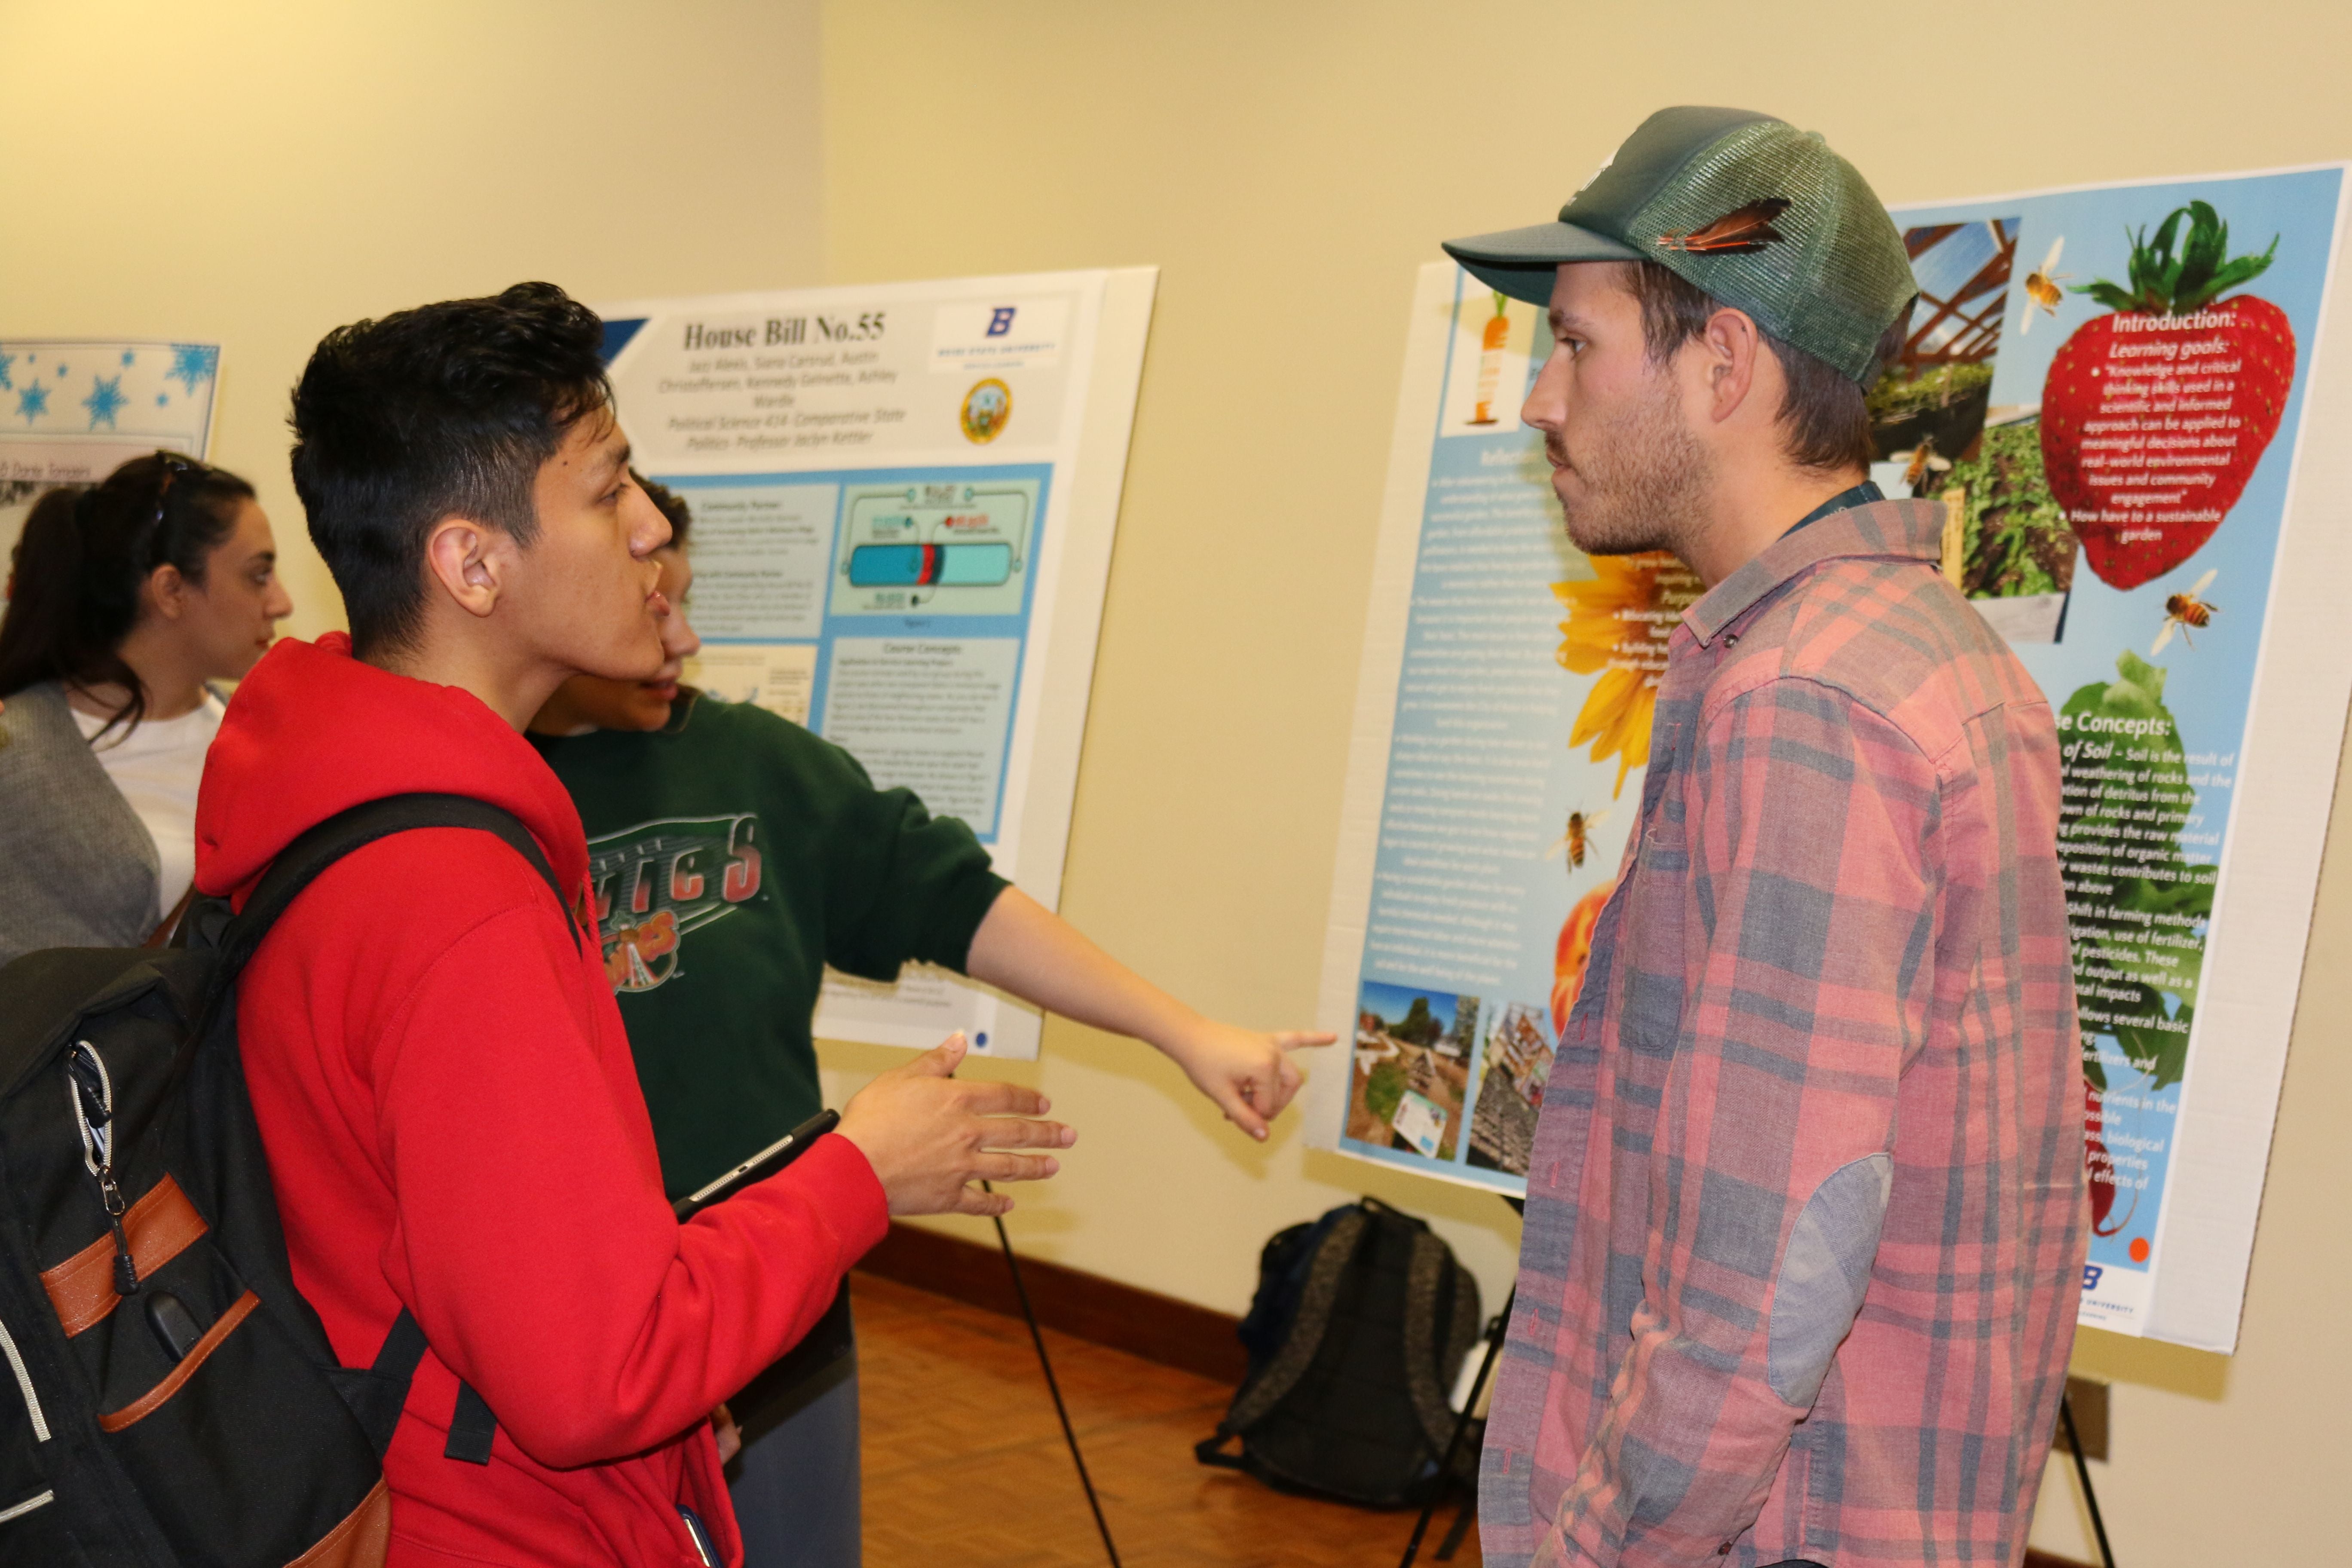 Students interacting at the Spring 2019 Service-Learning Student Poster Exhibition